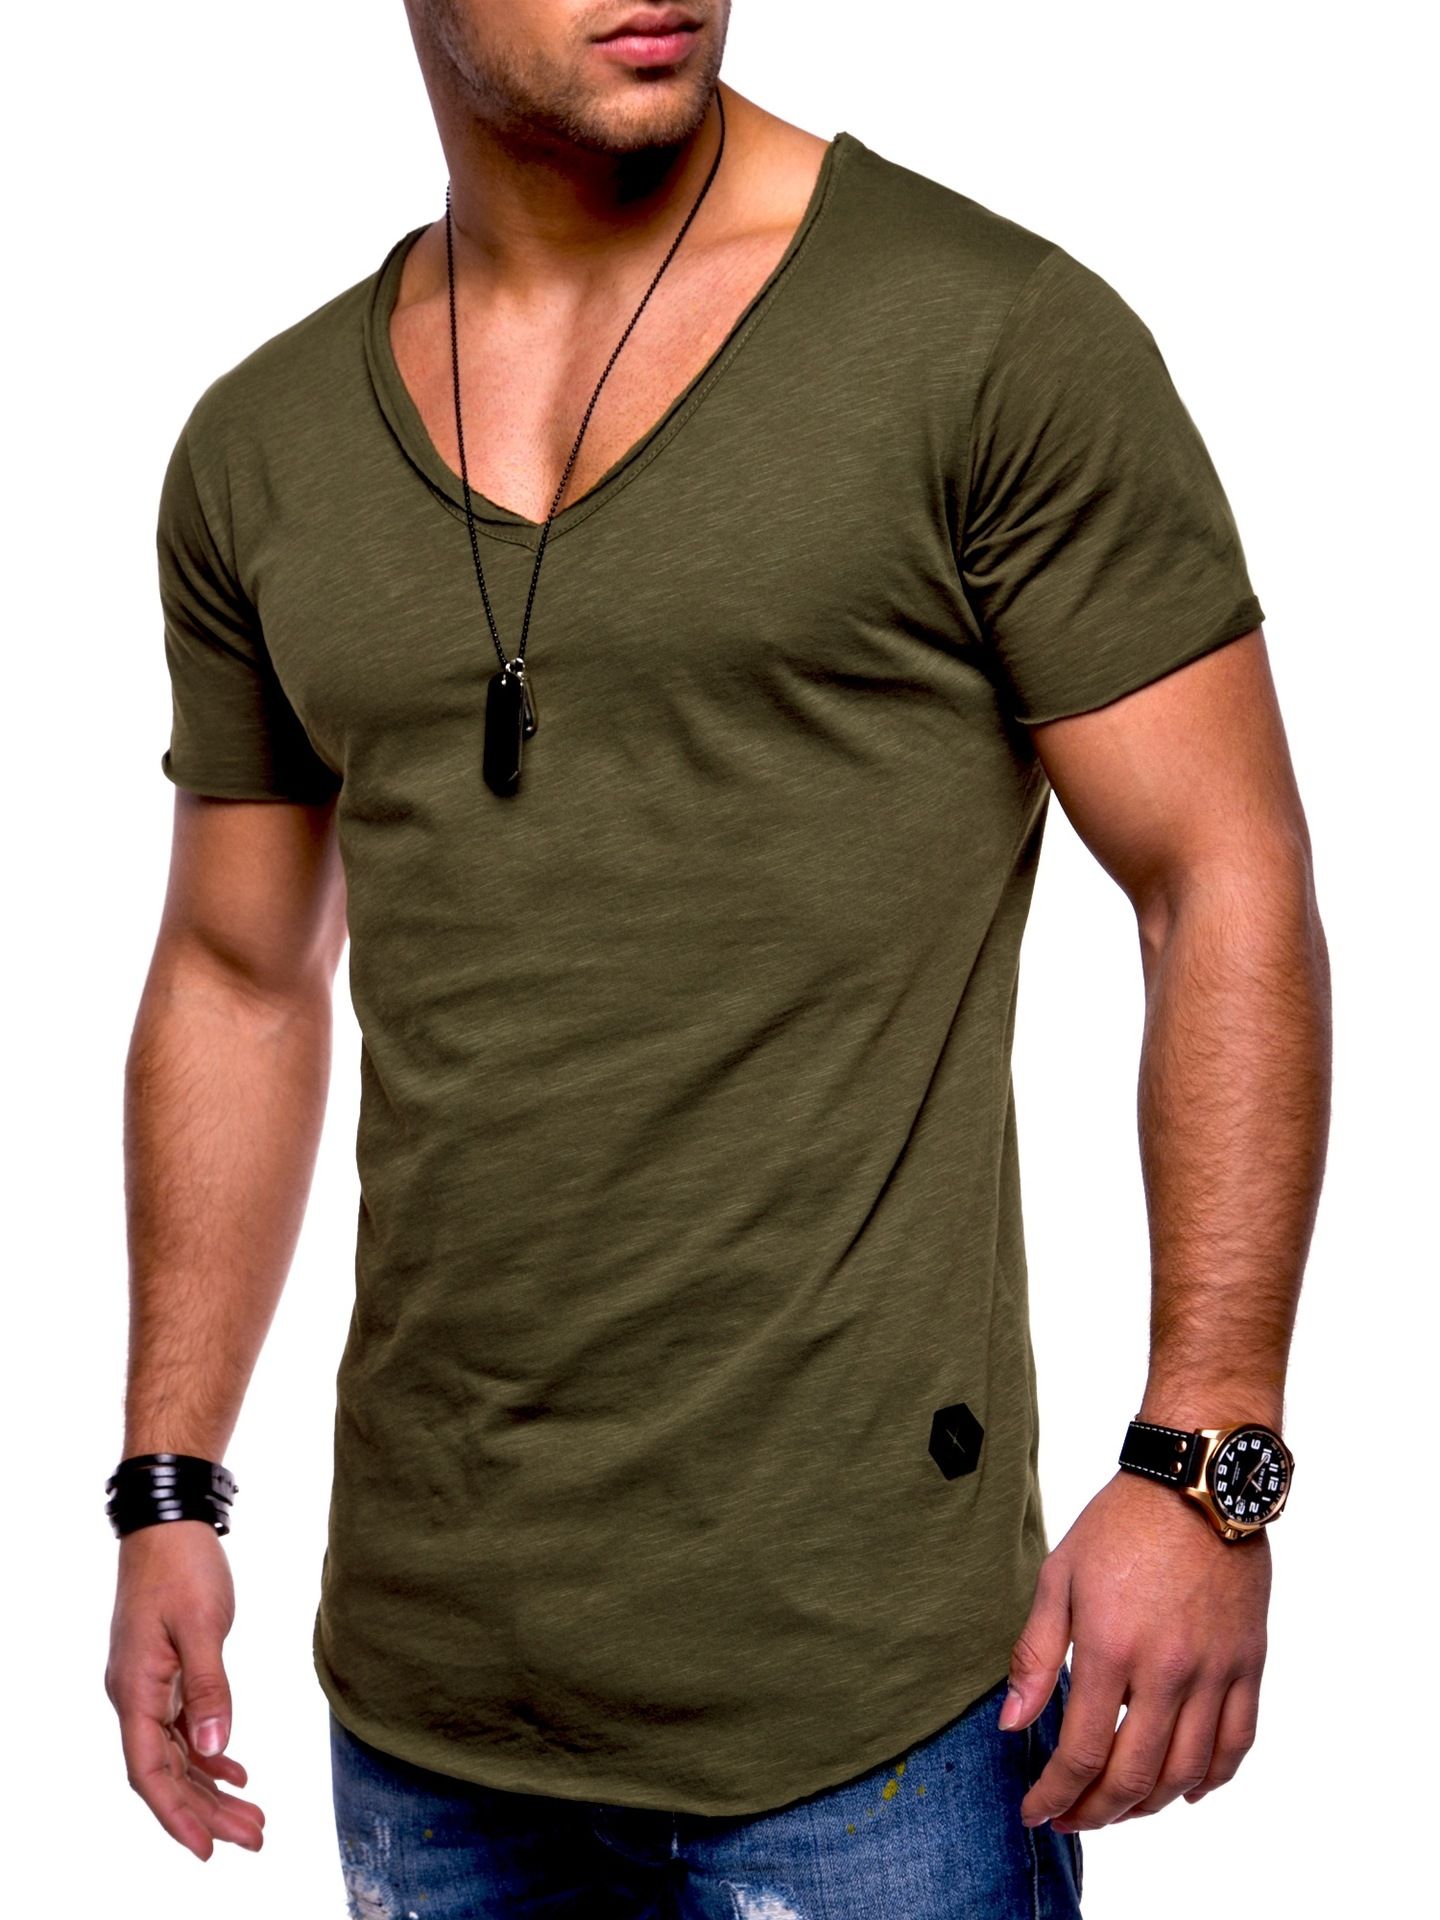 Designer Mens T Summer Casual Tops Mens Short Sleeve TShirts V Neck Casual Mens Cotton T Shirt Slim Fit T From Fashionclothing2019, $22.68 | DHgate.Com